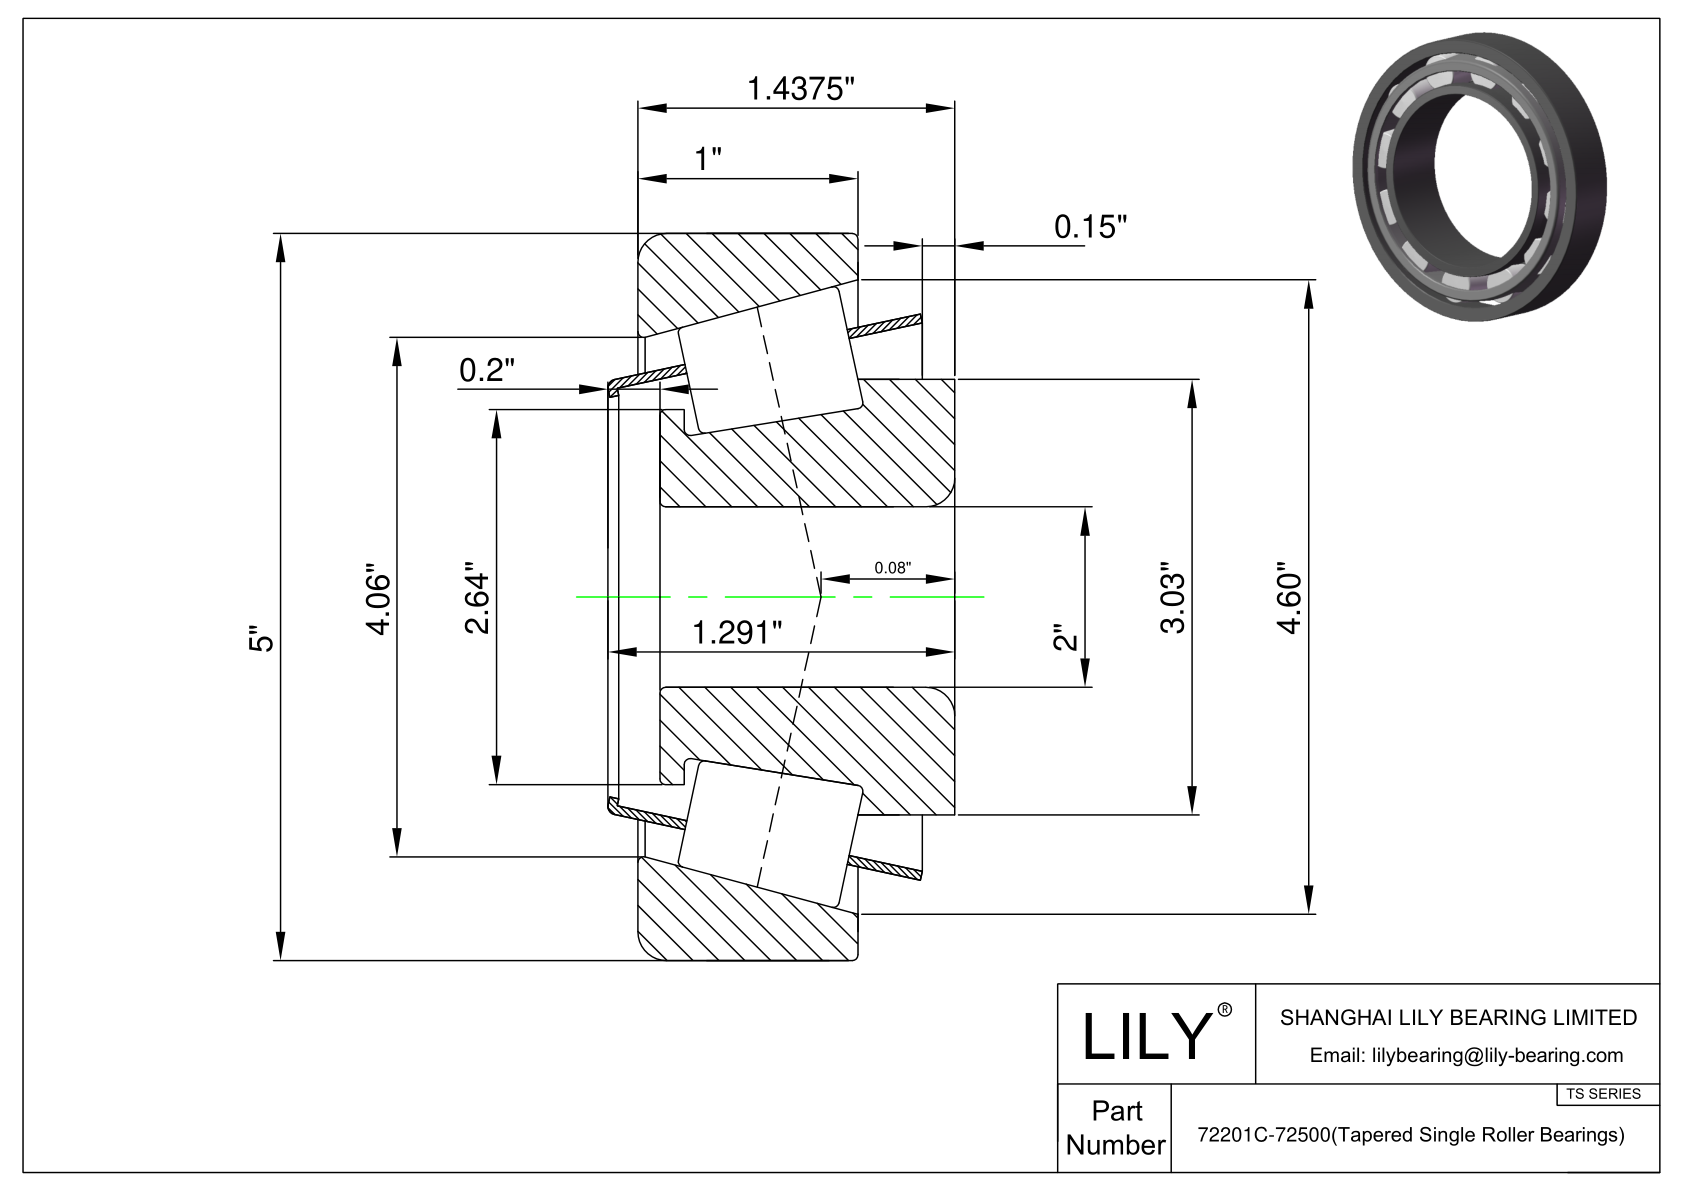 72201C-72500 TS (Tapered Single Roller Bearings) (Imperial) cad drawing